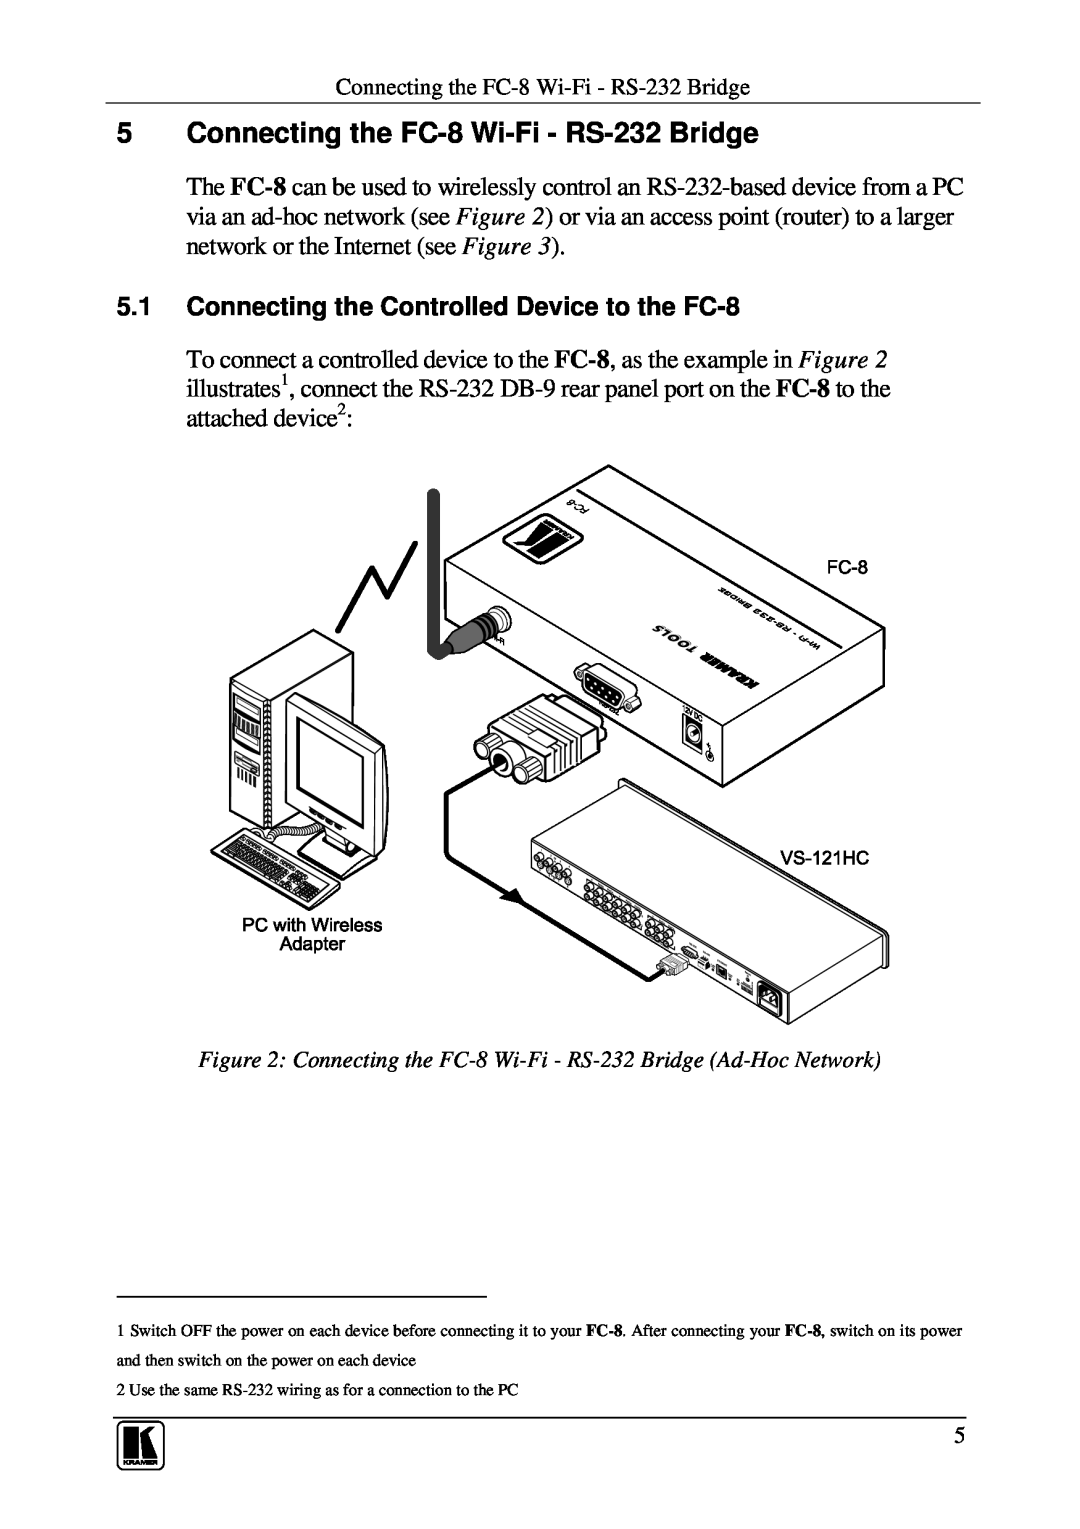 Kramer Electronics user manual Connecting the FC-8 Wi-Fi - RS-232 Bridge, Connecting the Controlled Device to the FC-8 